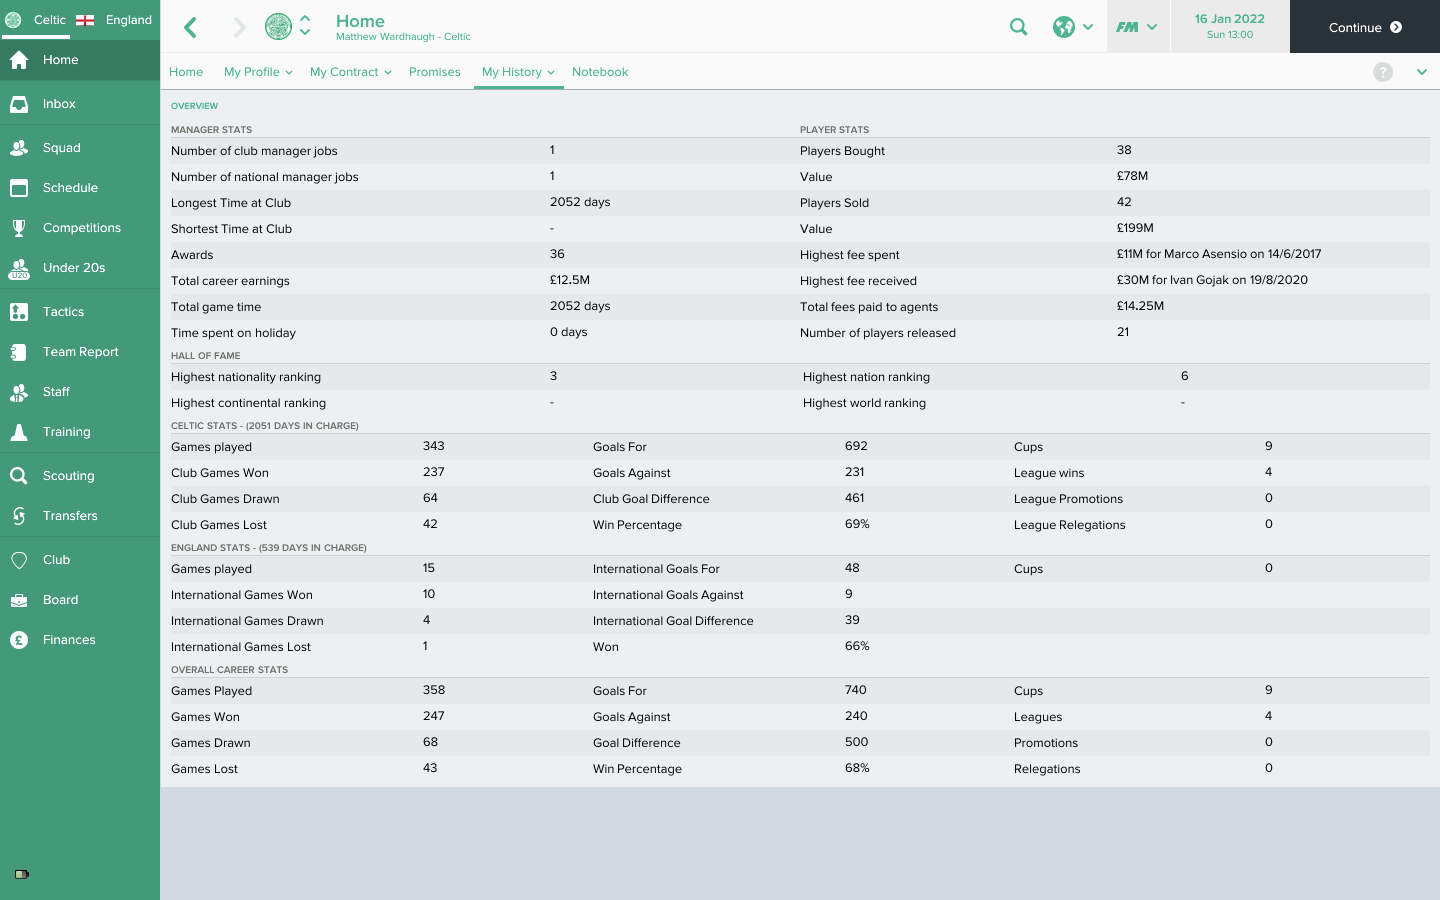 Football Manager Overview